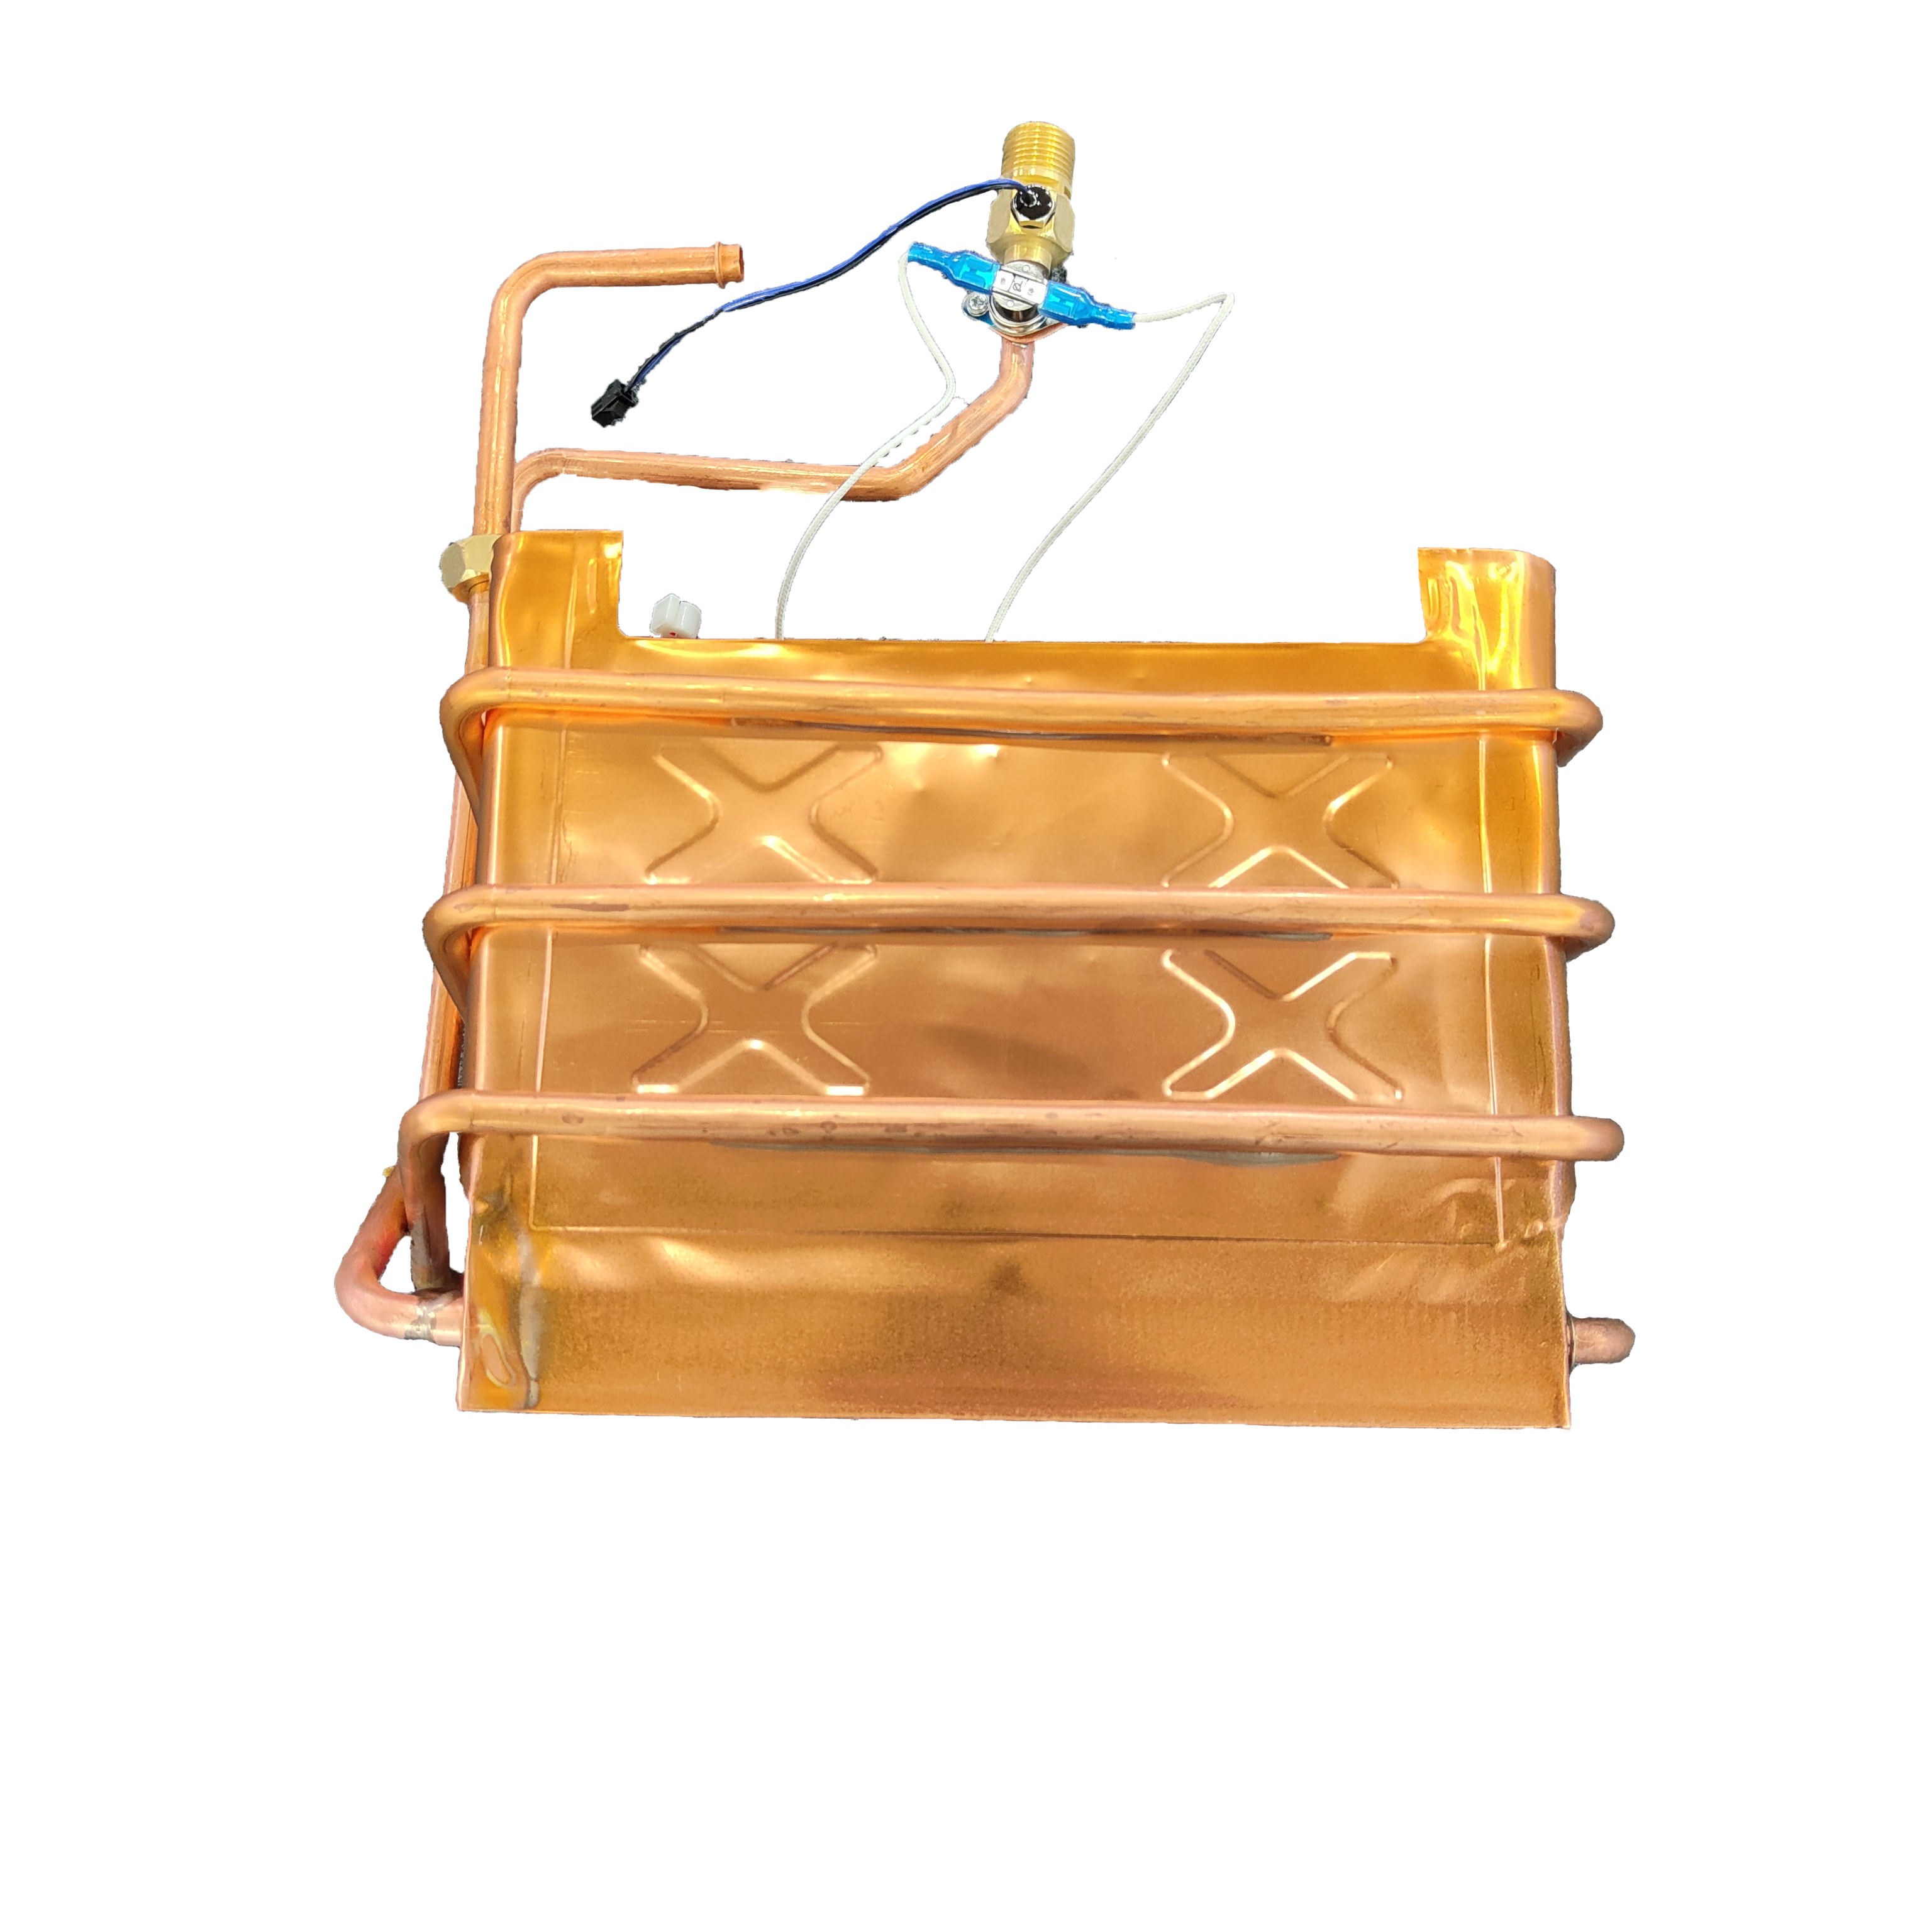 What Is The Advantage Of Oxygen-Free Copper Heat Exchanger?